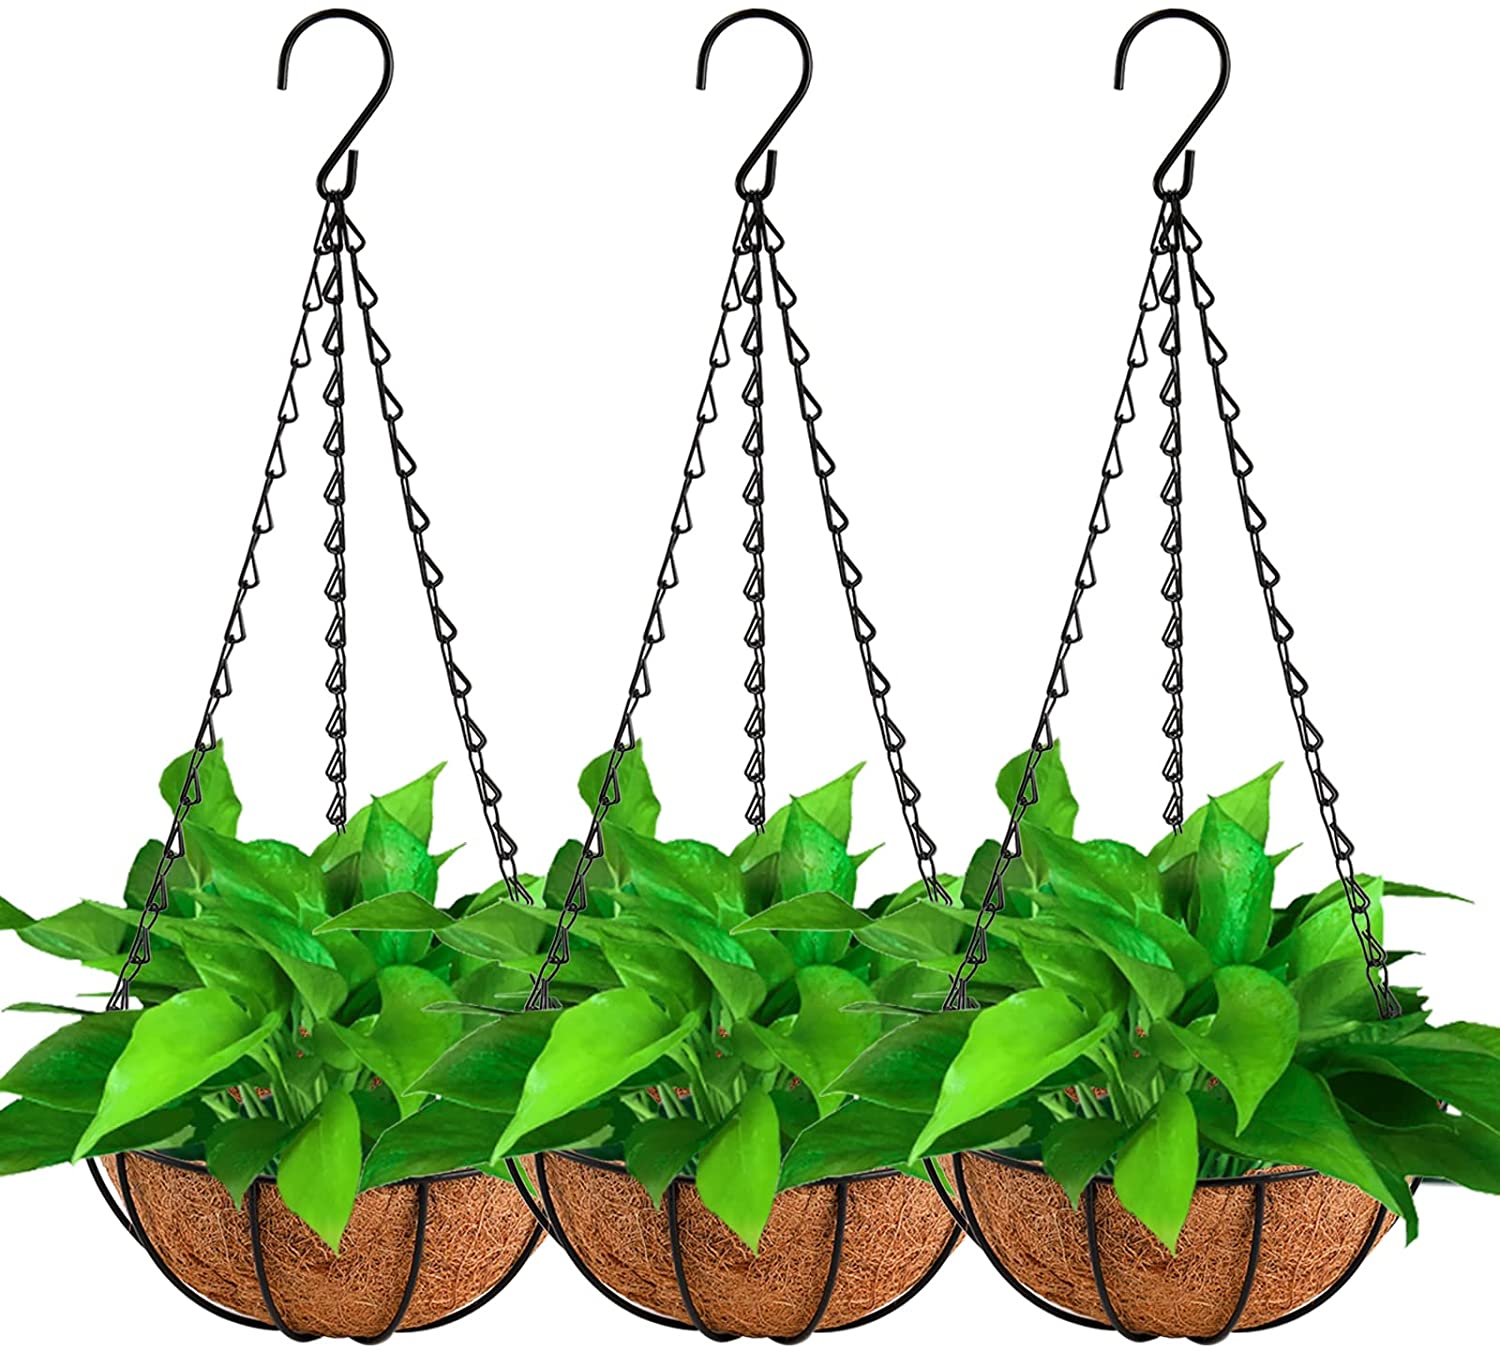 Tosnail 3 Pack 8" Metal Hanging Flower Pots Hanging Planters Plant Basket with Coco Fiber Liners